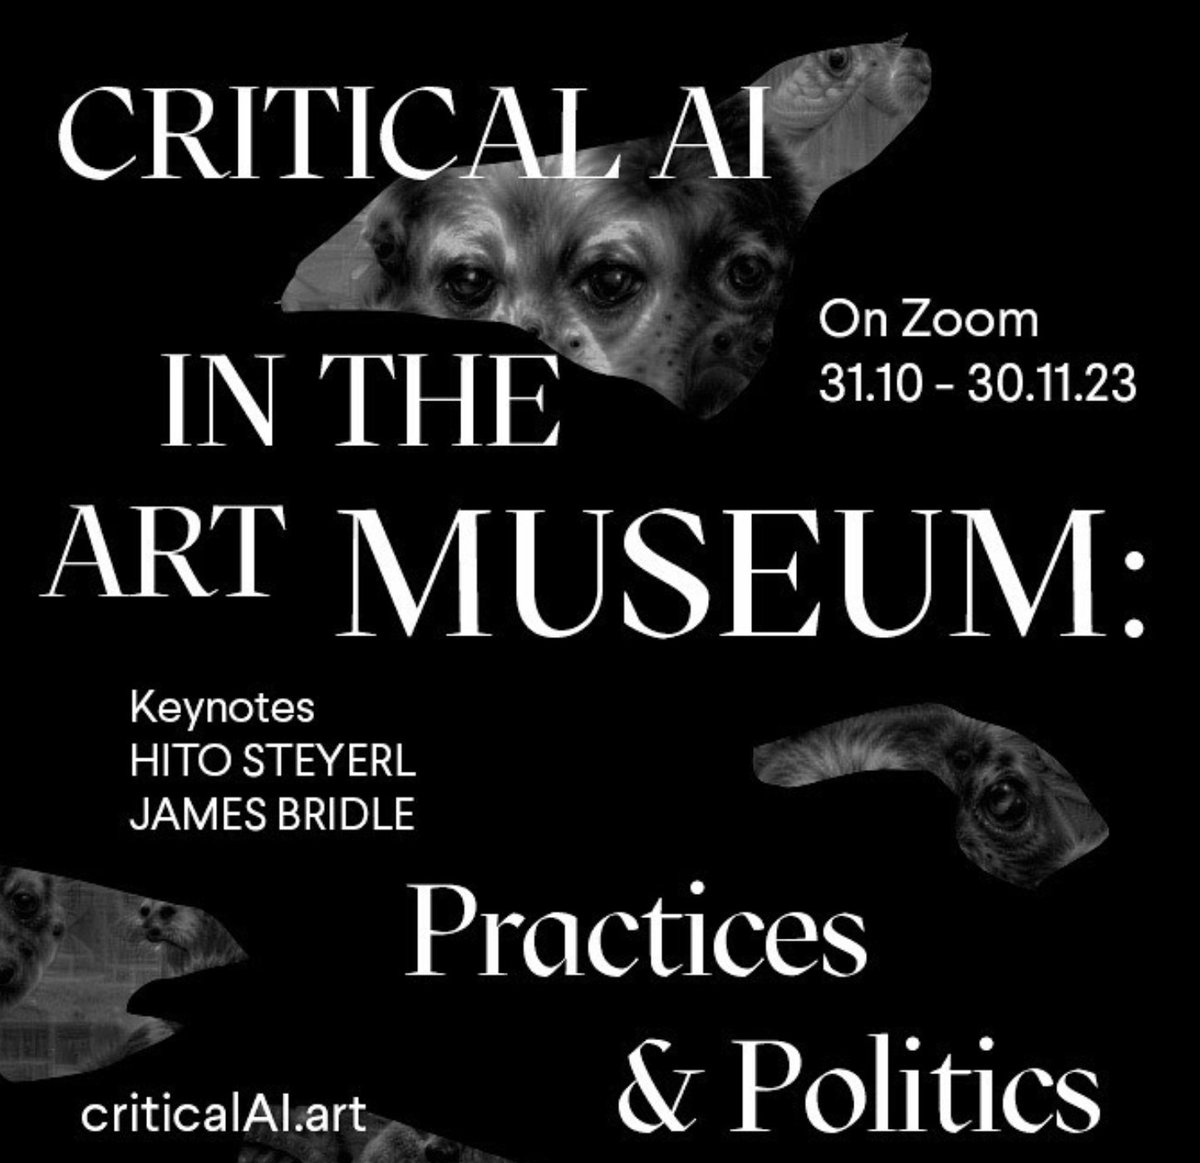 'Critical AI in the Art Museum: Practices & Politics' How might artists and cultural workers resist AI’s veneer of novelty and avoid being instrumentalised as an onboarding tool for Big Tech ? A series of online discussions to follow criticalai.art